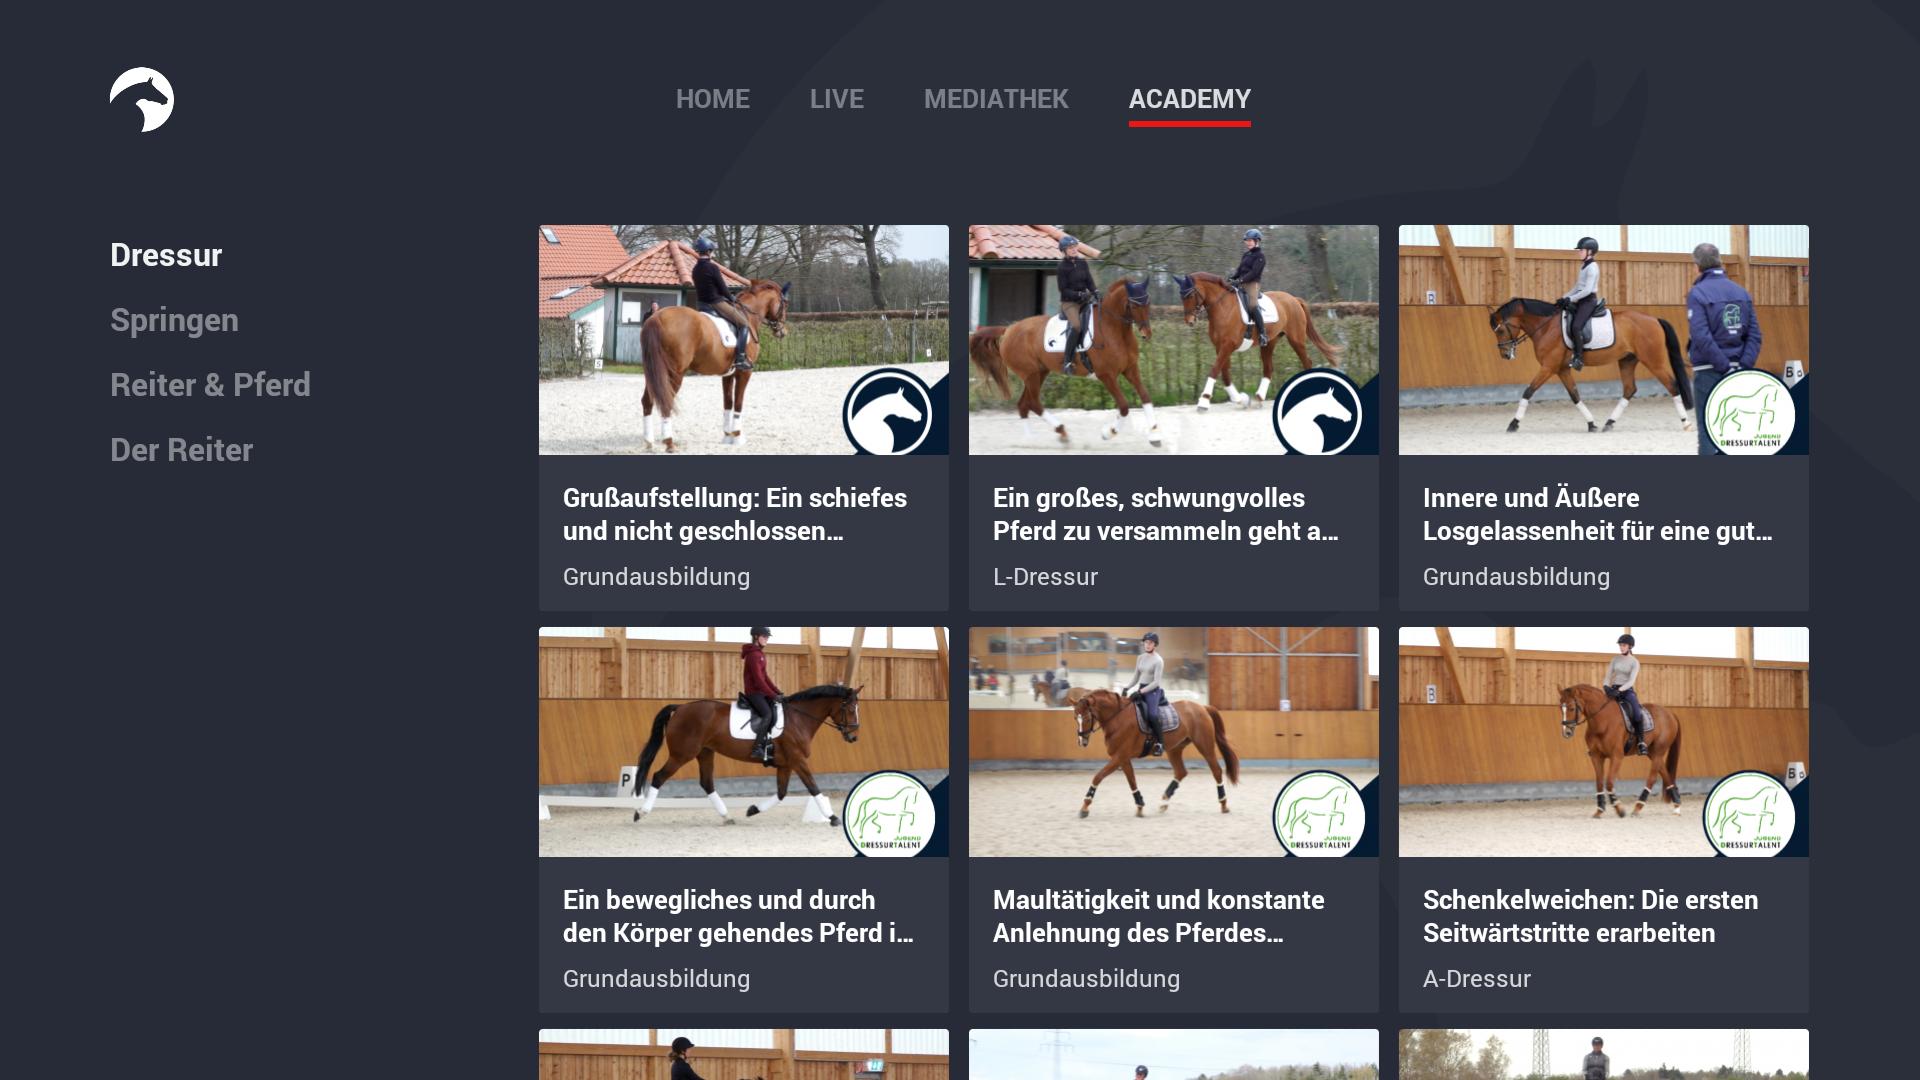 ClipMyHorse.TV for Android - APK Download